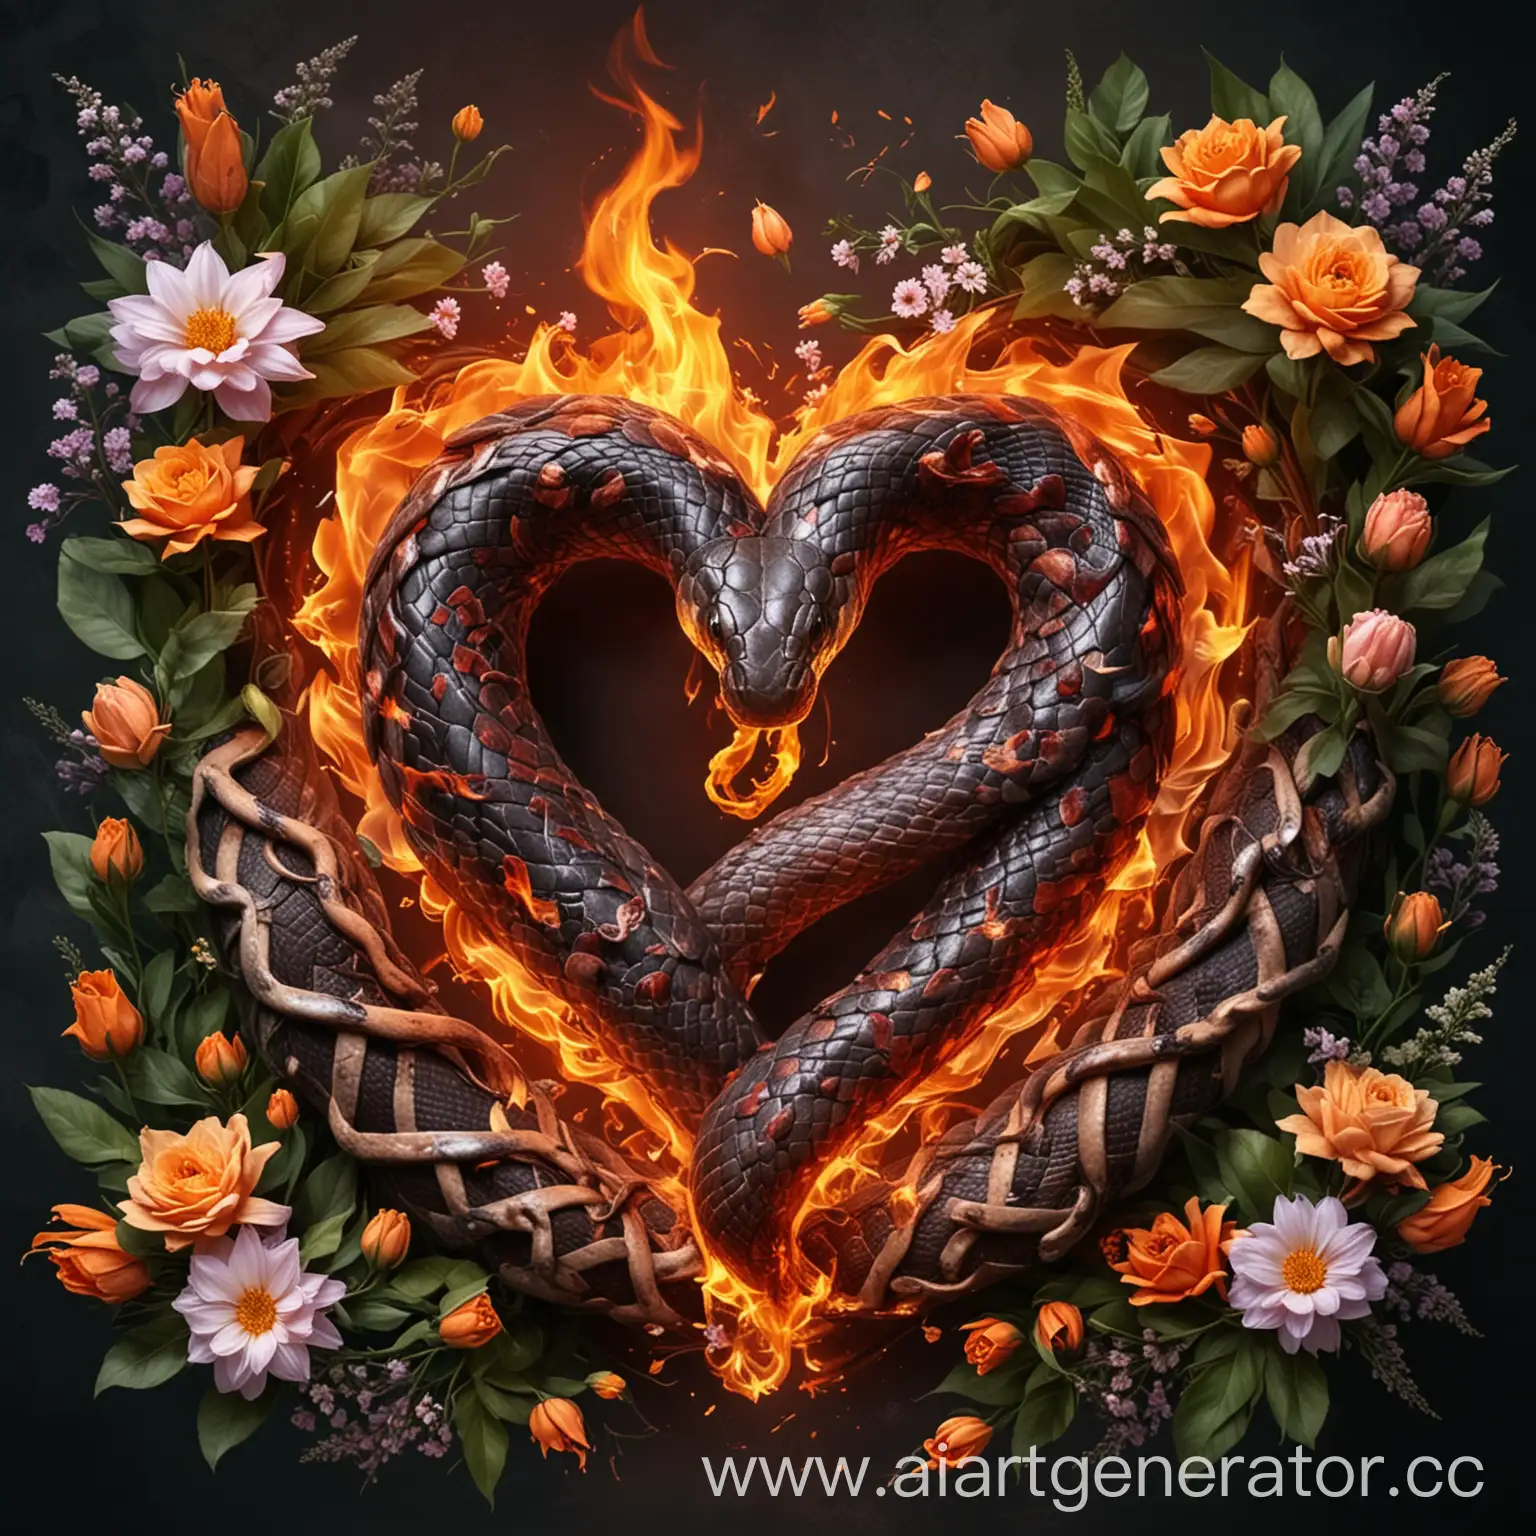 Flaming-Heart-Snake-Amid-Blooming-Flowers